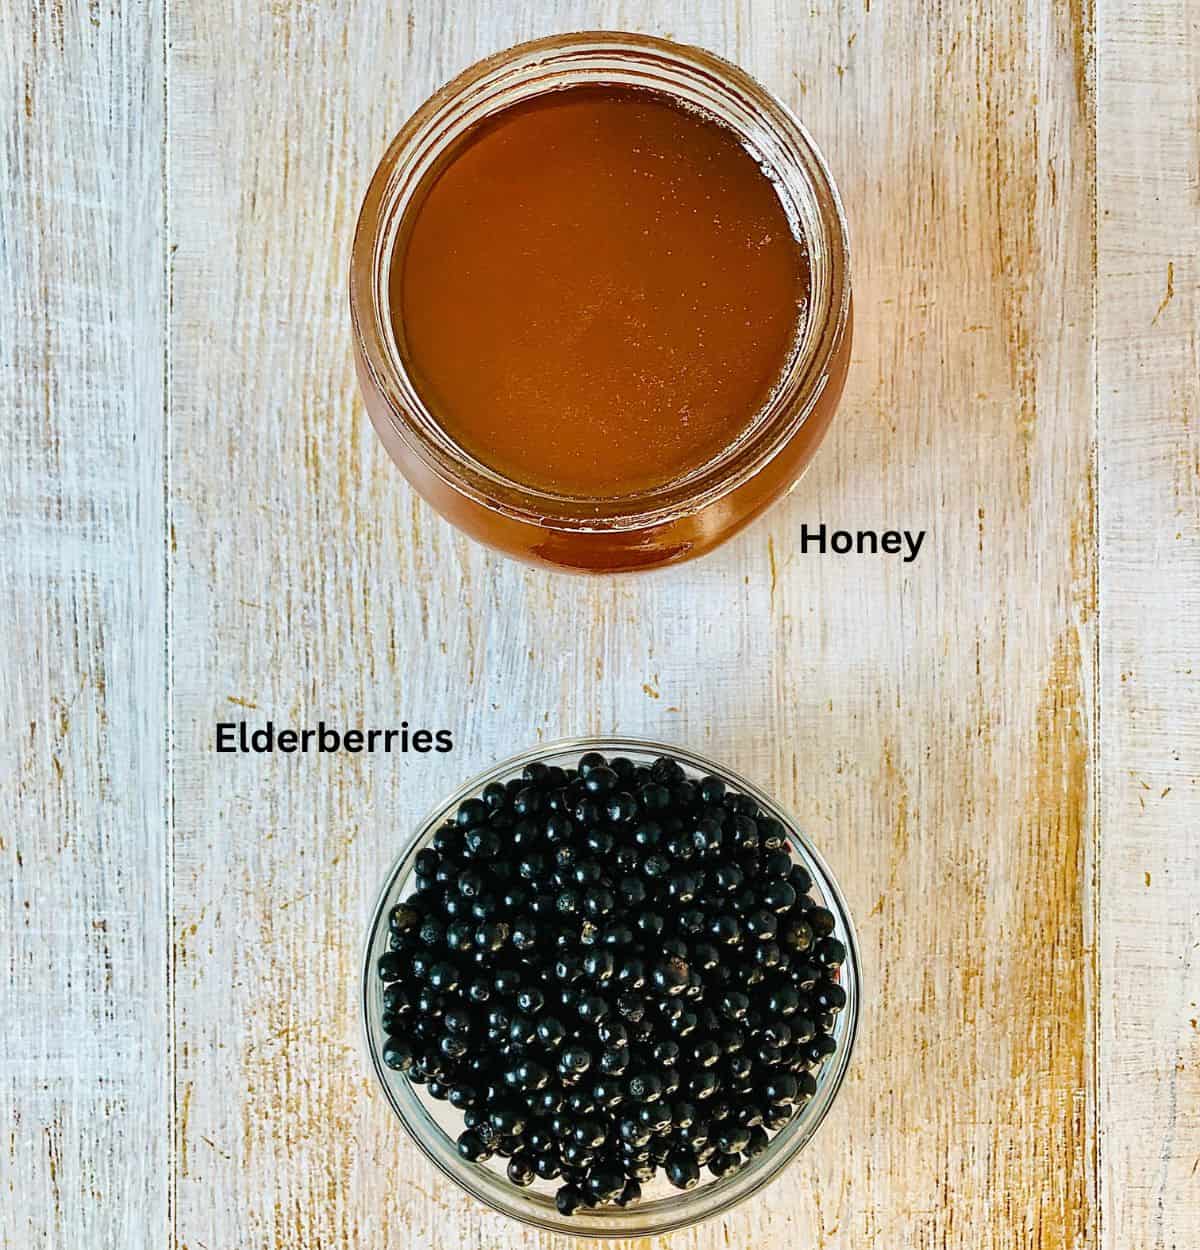 A jar containing honey and a small glass dish containing elderberries.